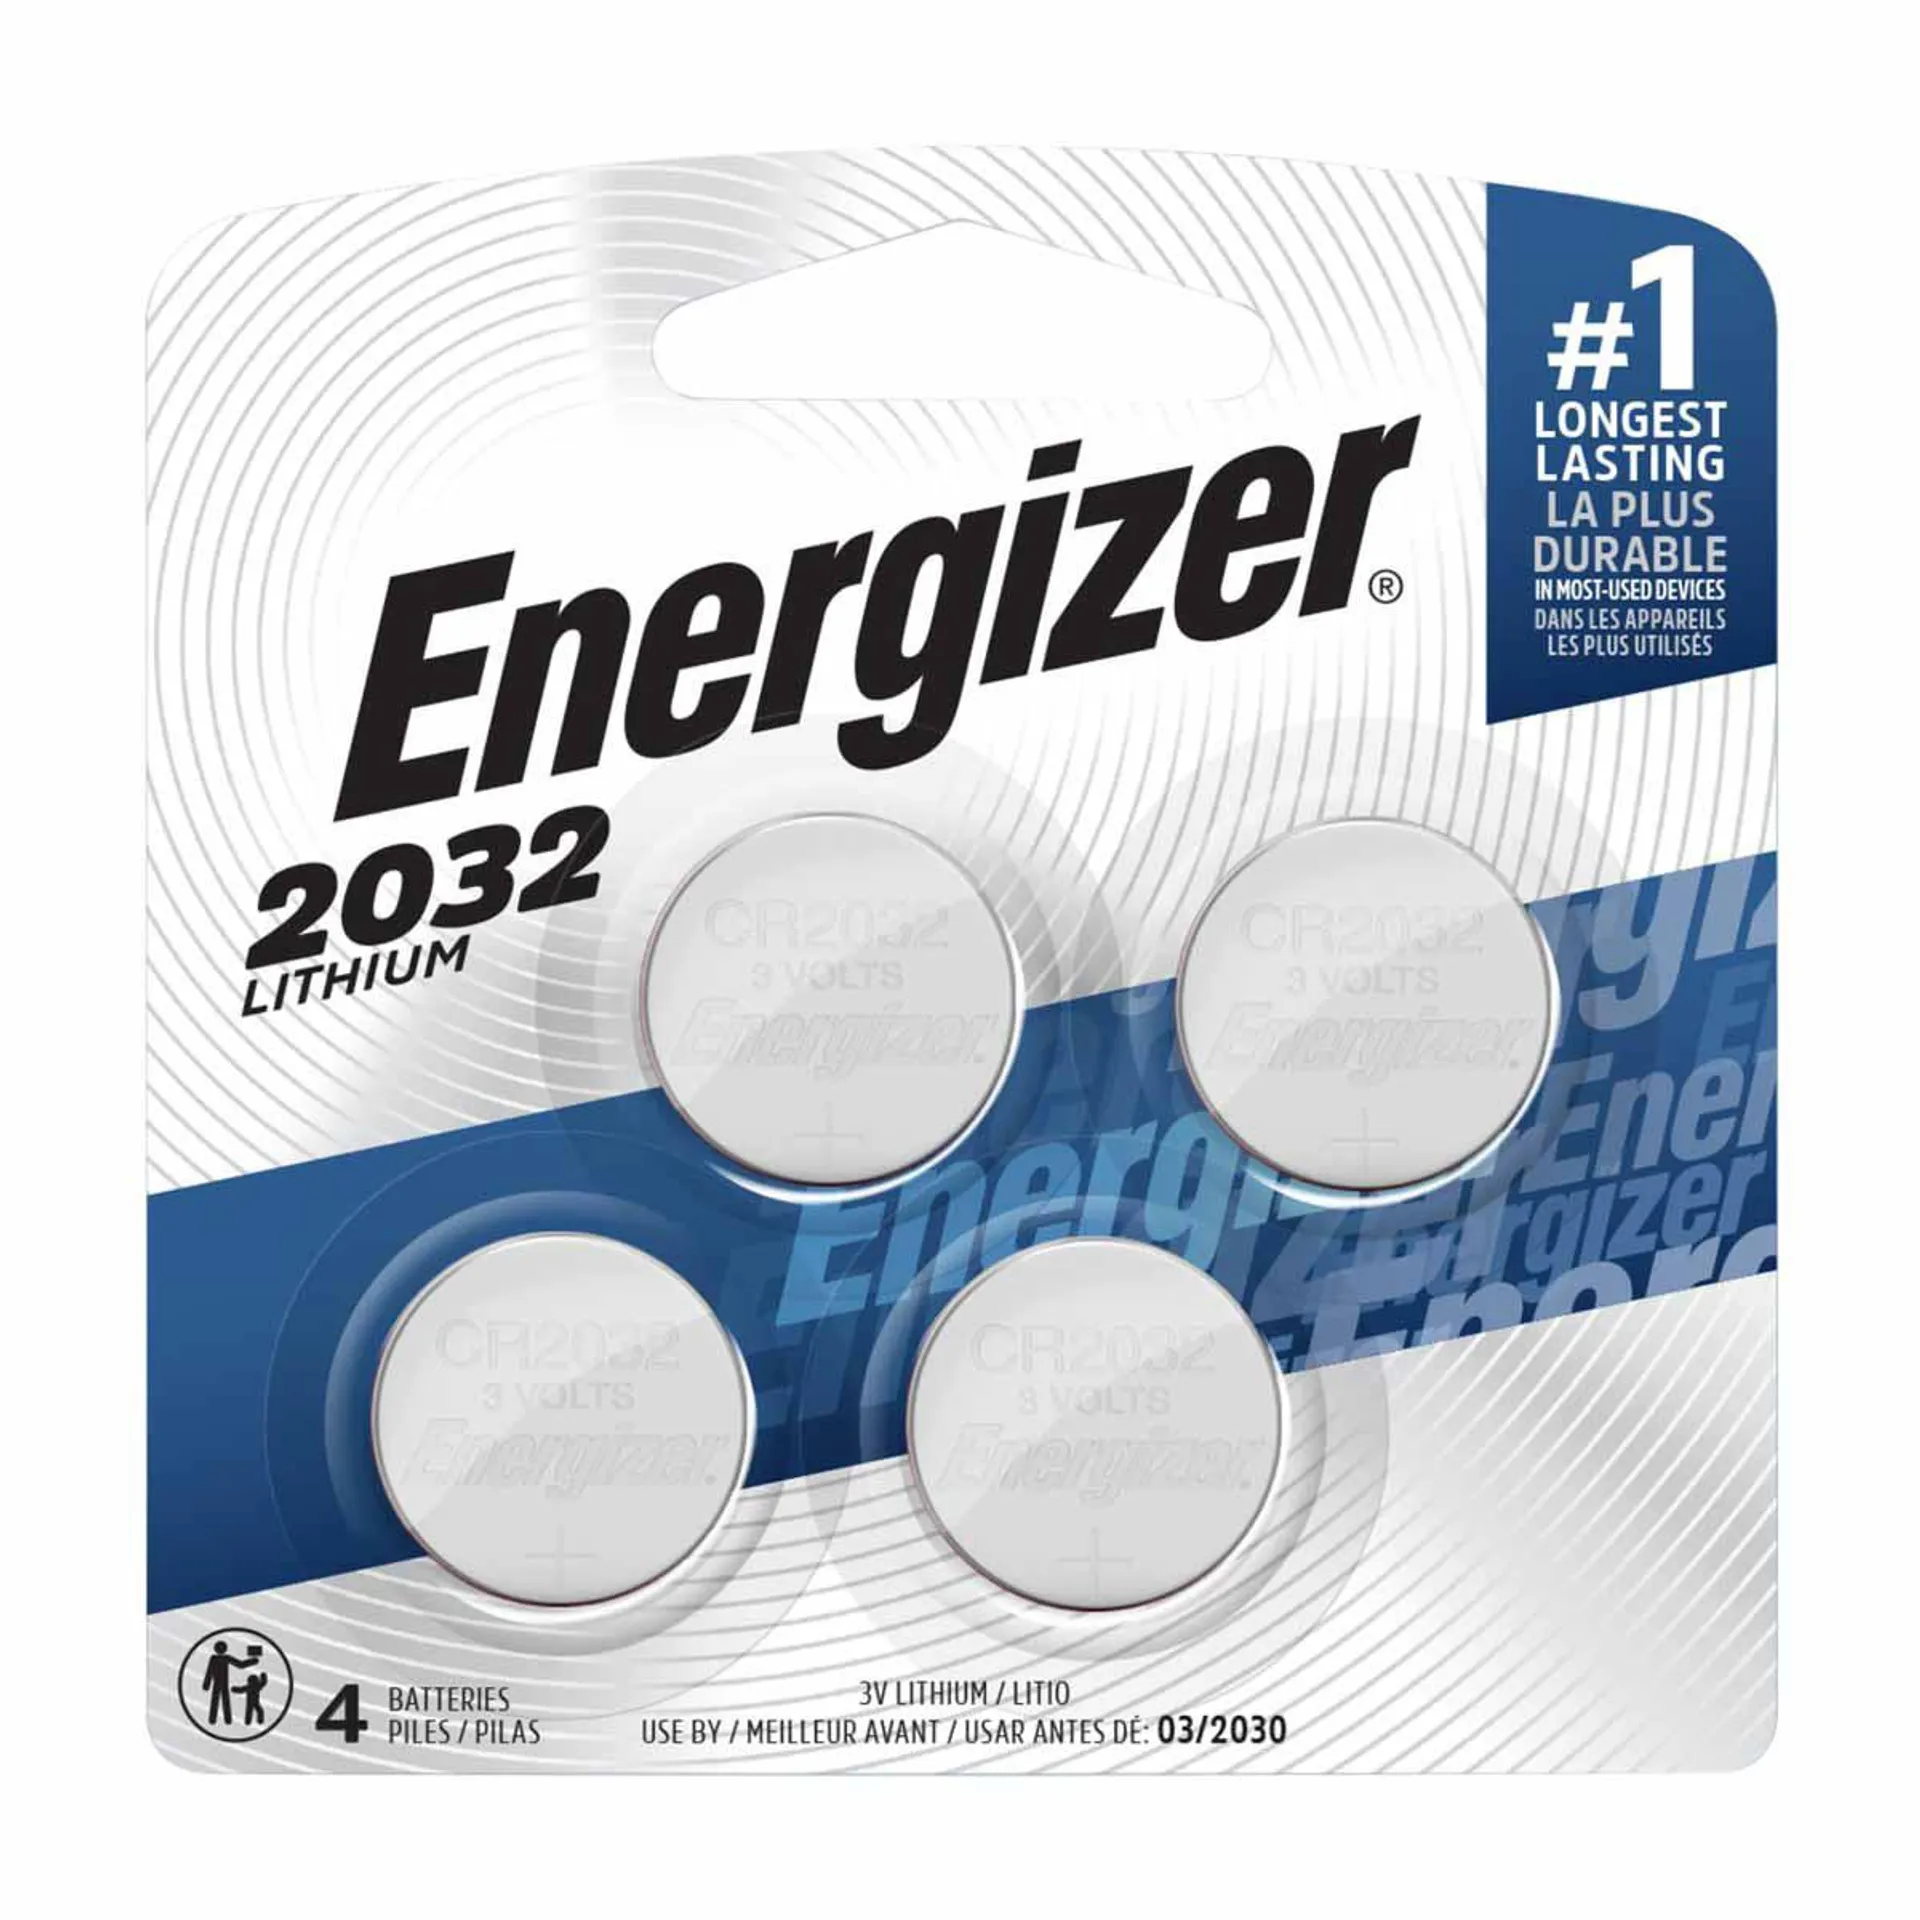 Energizer 2032 3v Lithium Coin Batteries, 4 Ct